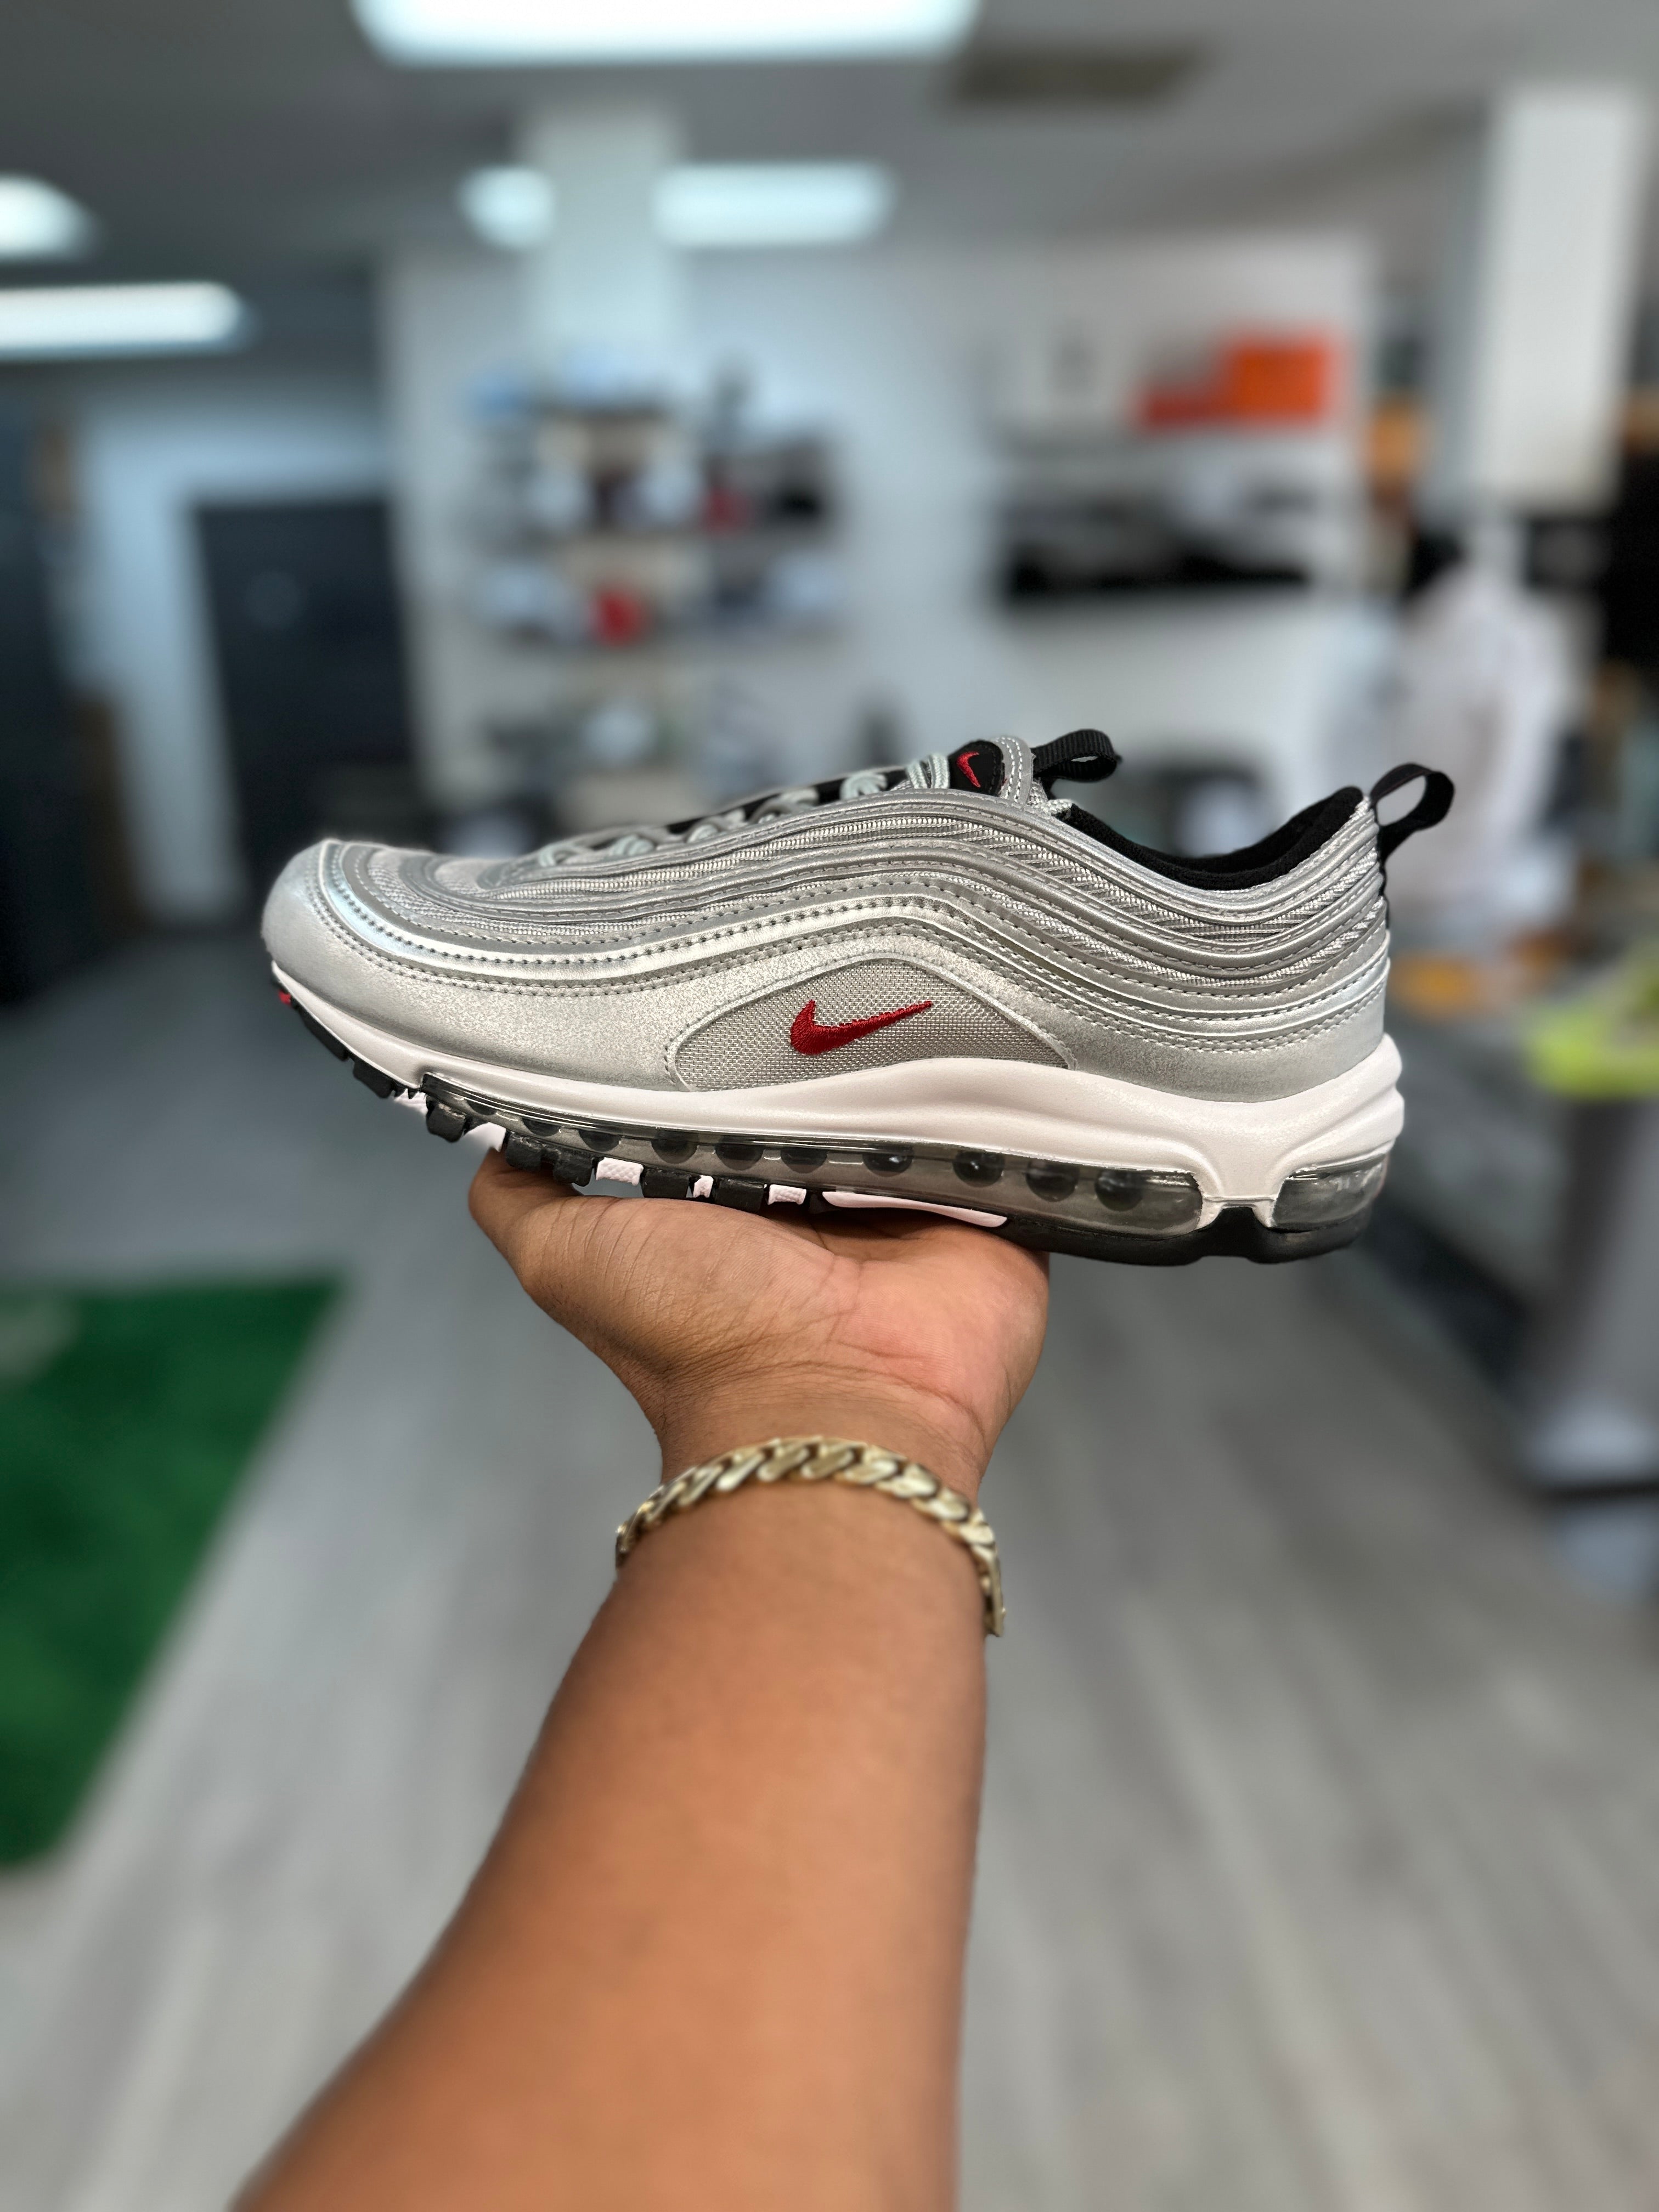 Official Images of the Nike jordan Air Max 97 White Bullet